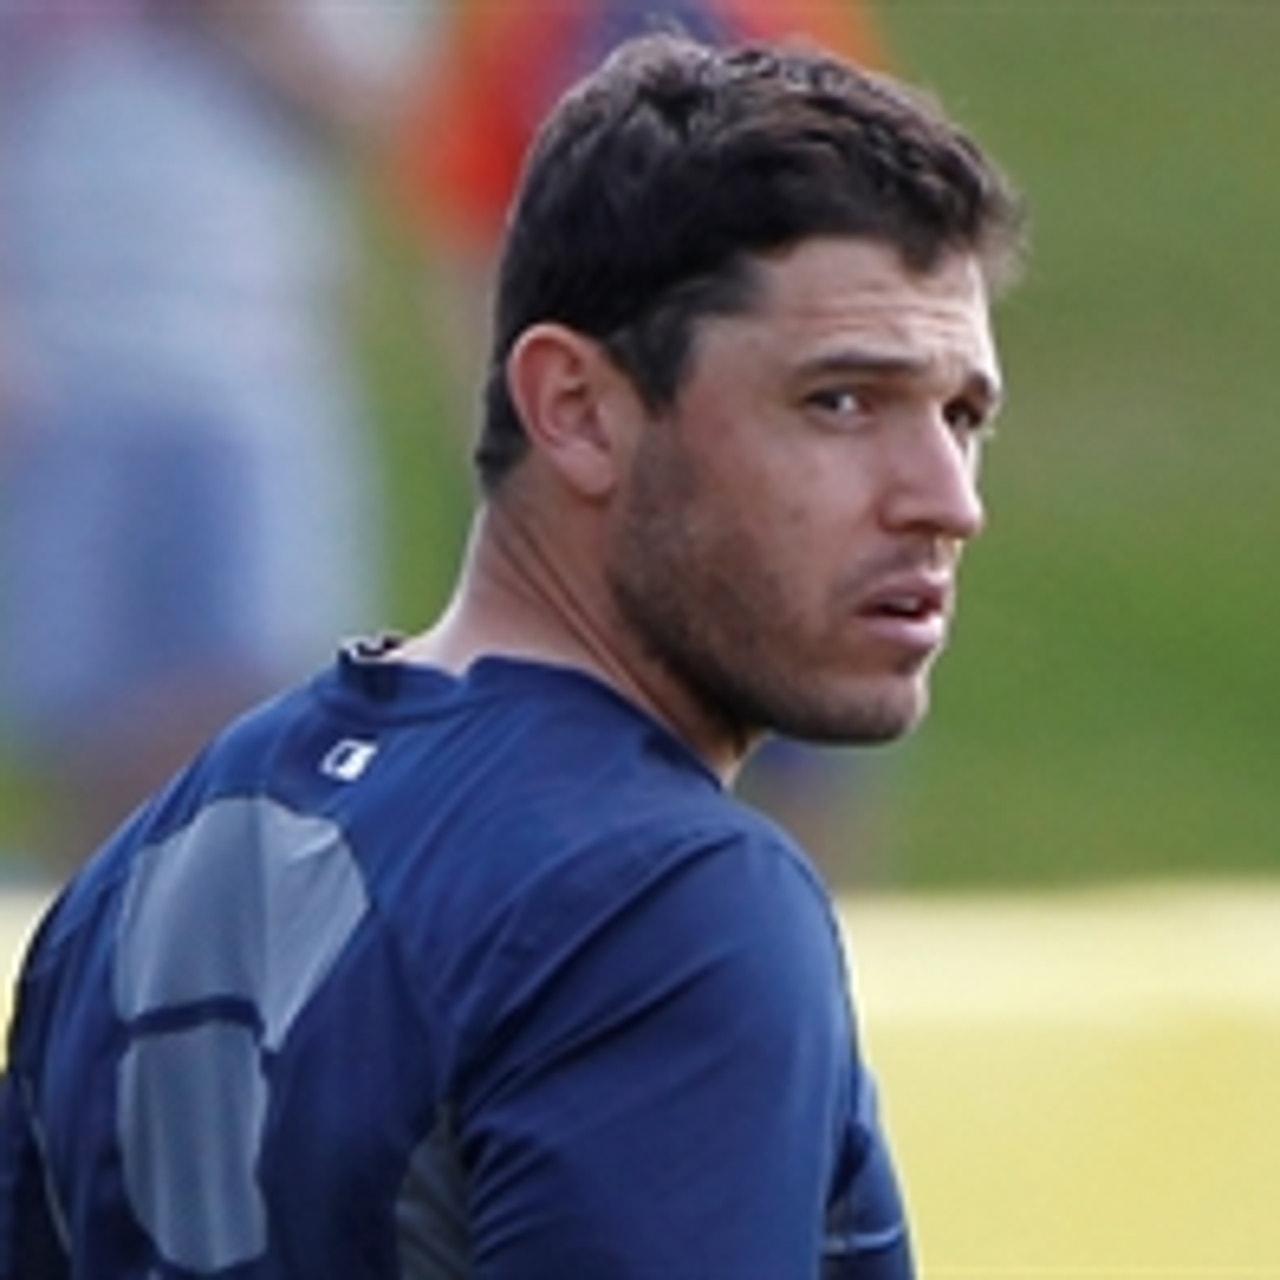 Players Only: Ian Kinsler sounds off